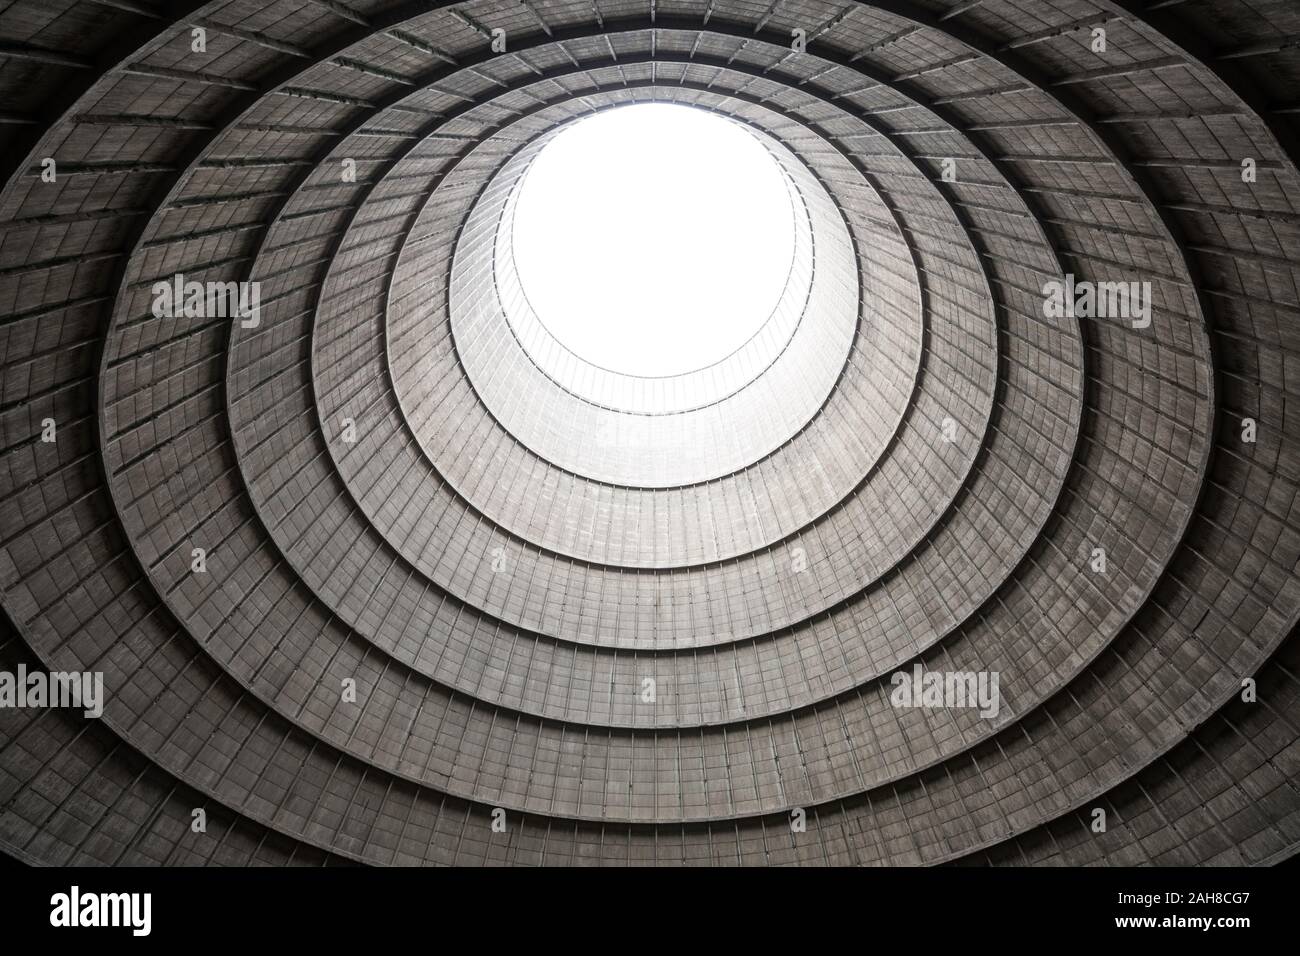 Symmetrical wide angle view of the geometric interior of a cooling tower as seen from below Stock Photo